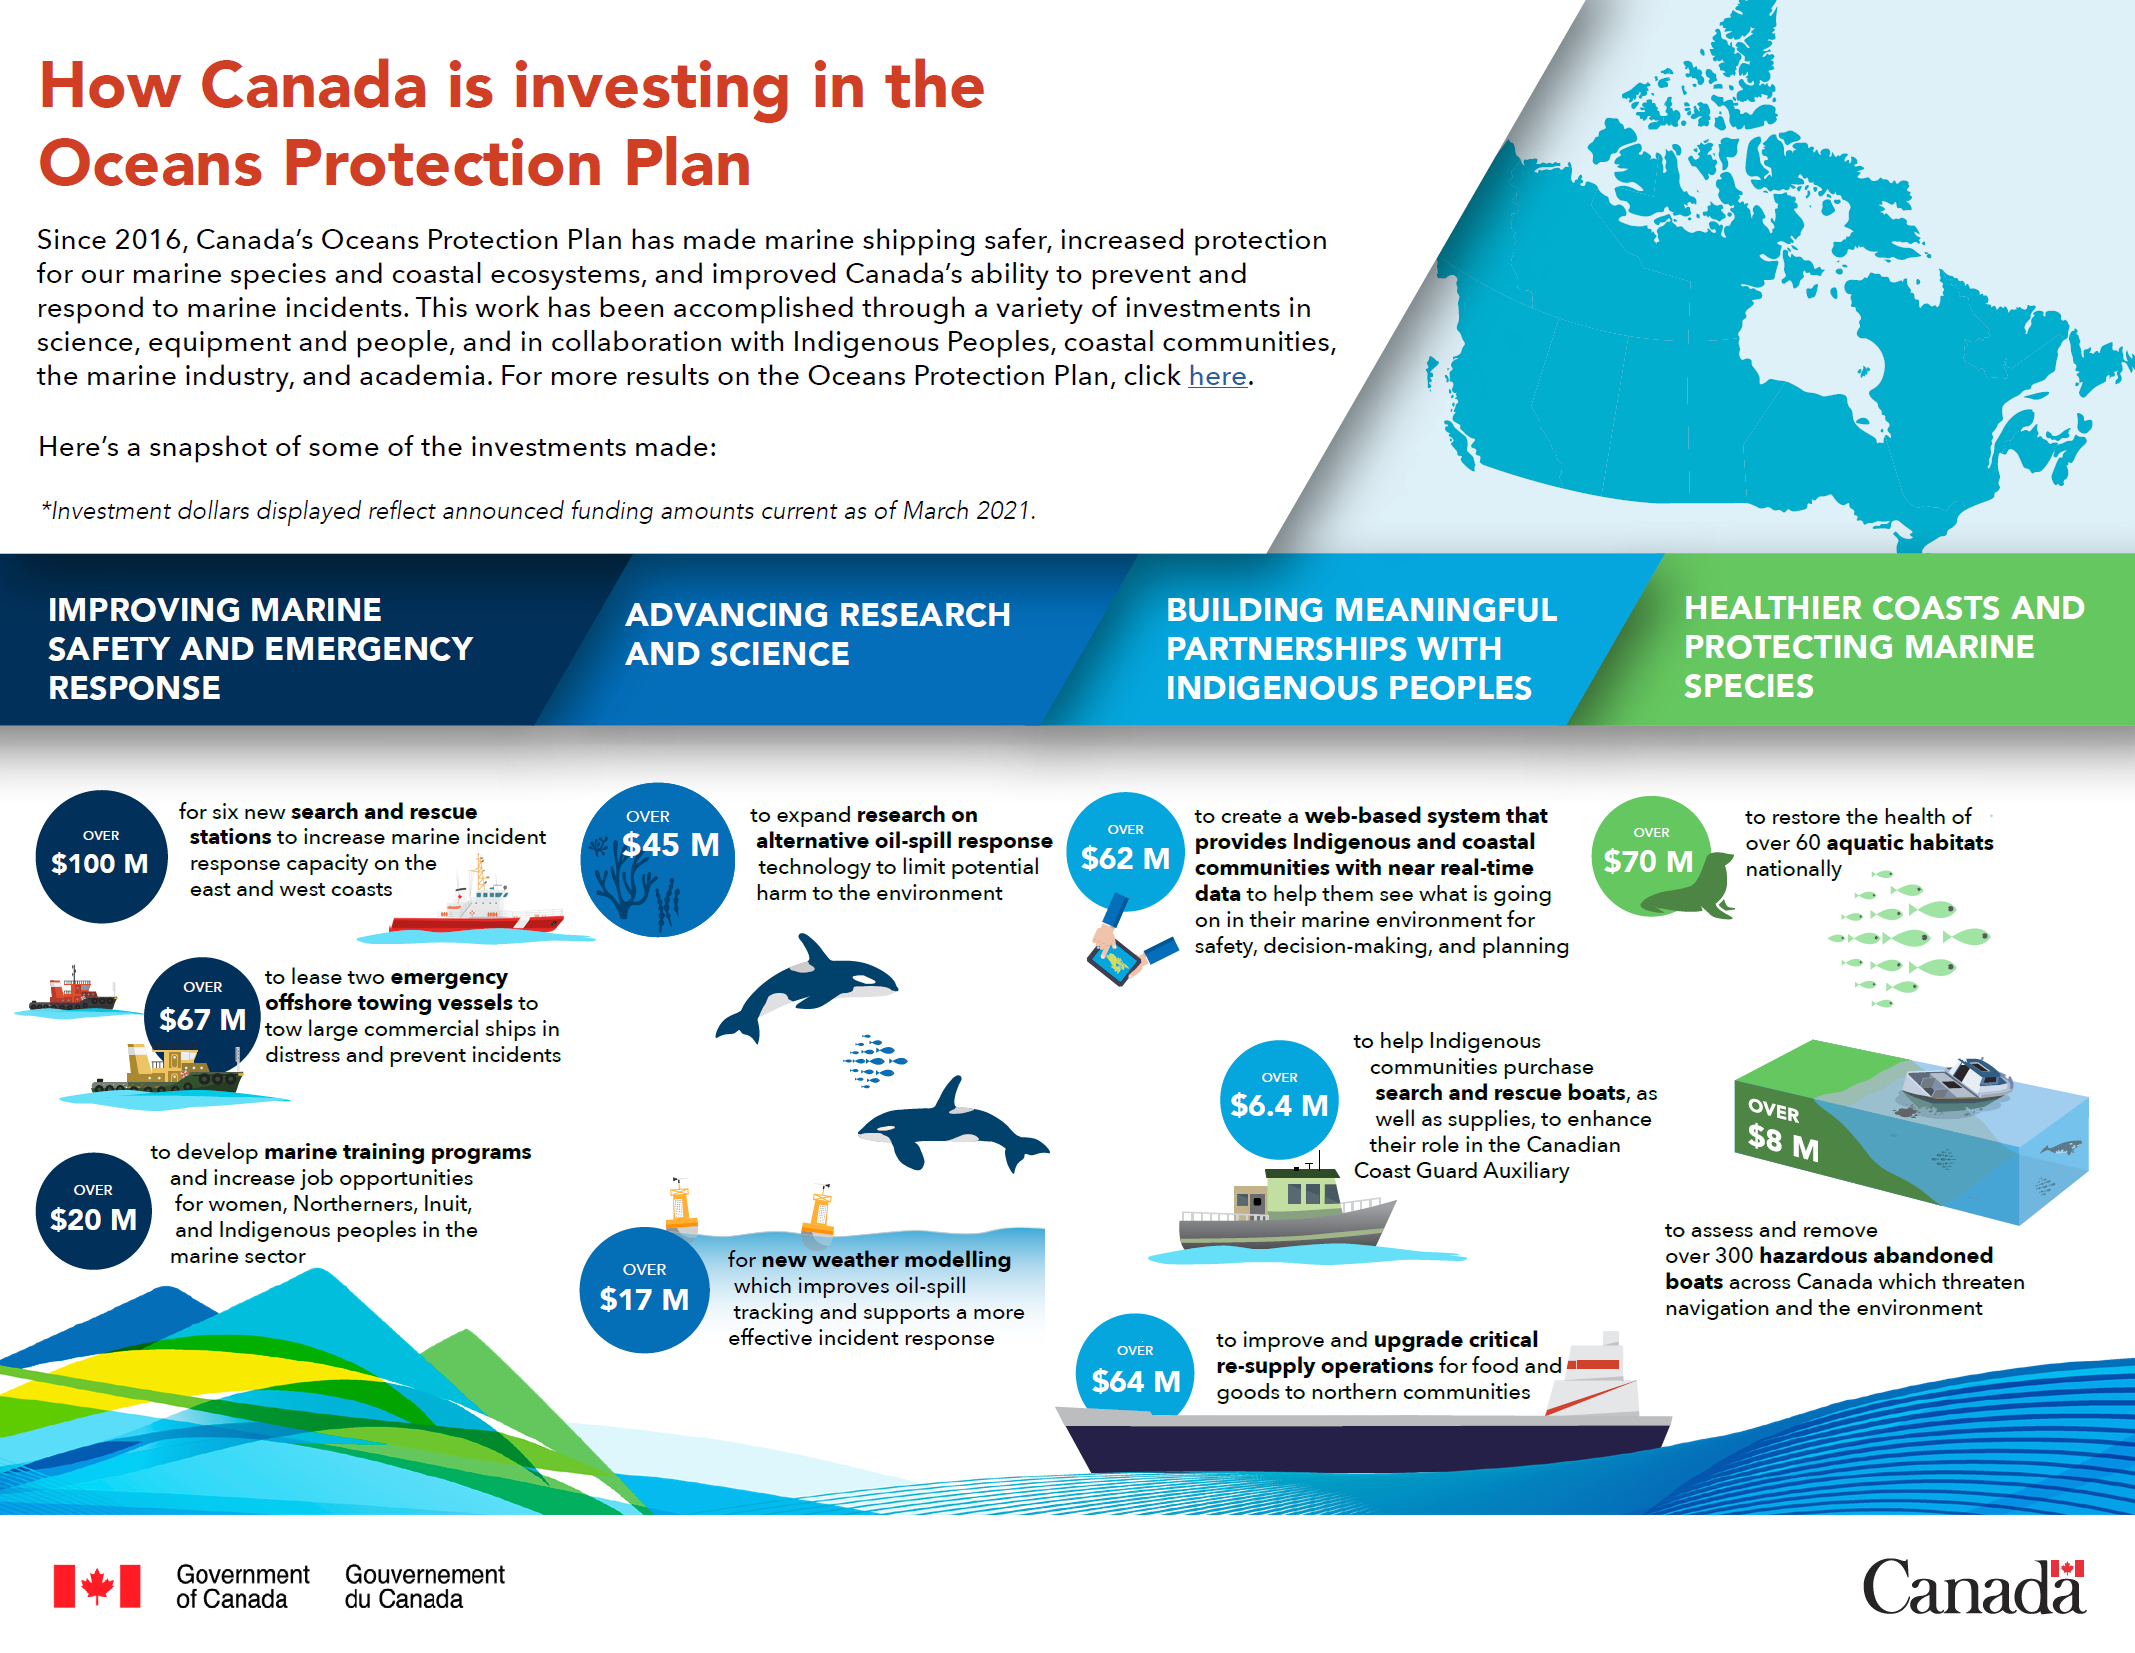 How Canada is investing in the Oceans Protection Plan